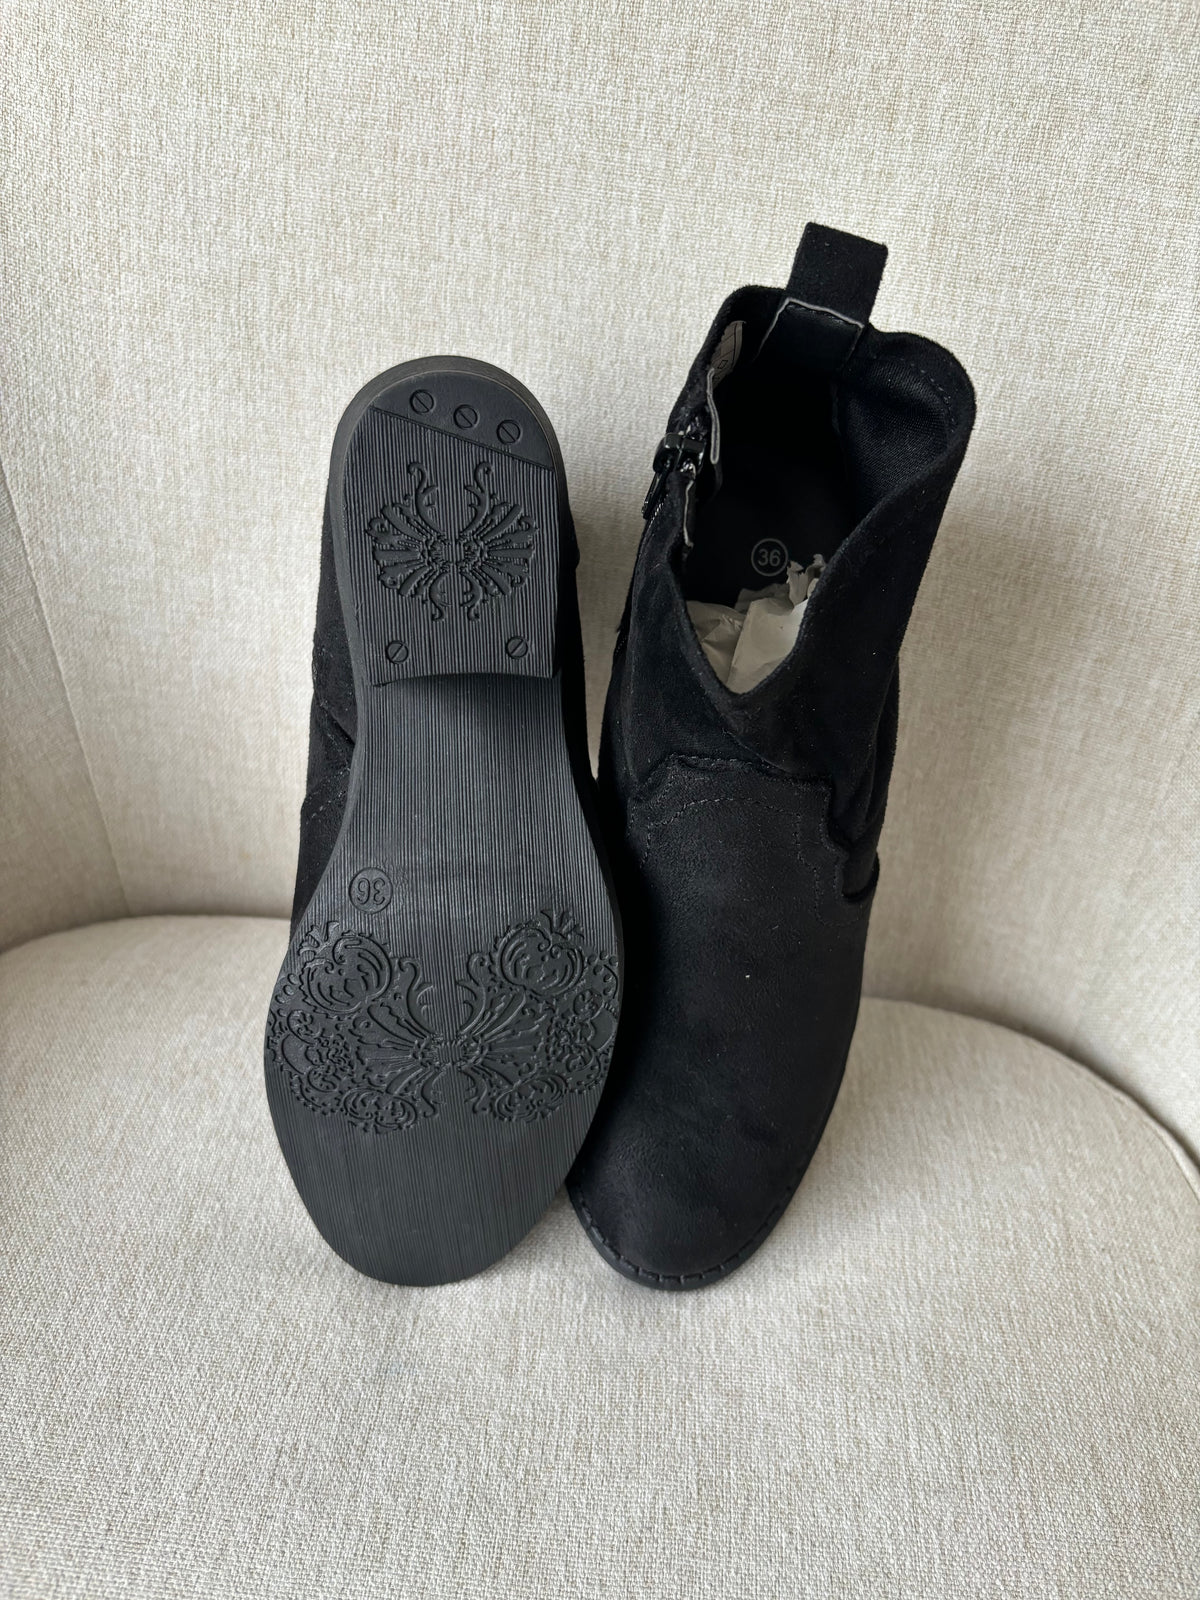 Black Suede Boots by CityWalk size 3